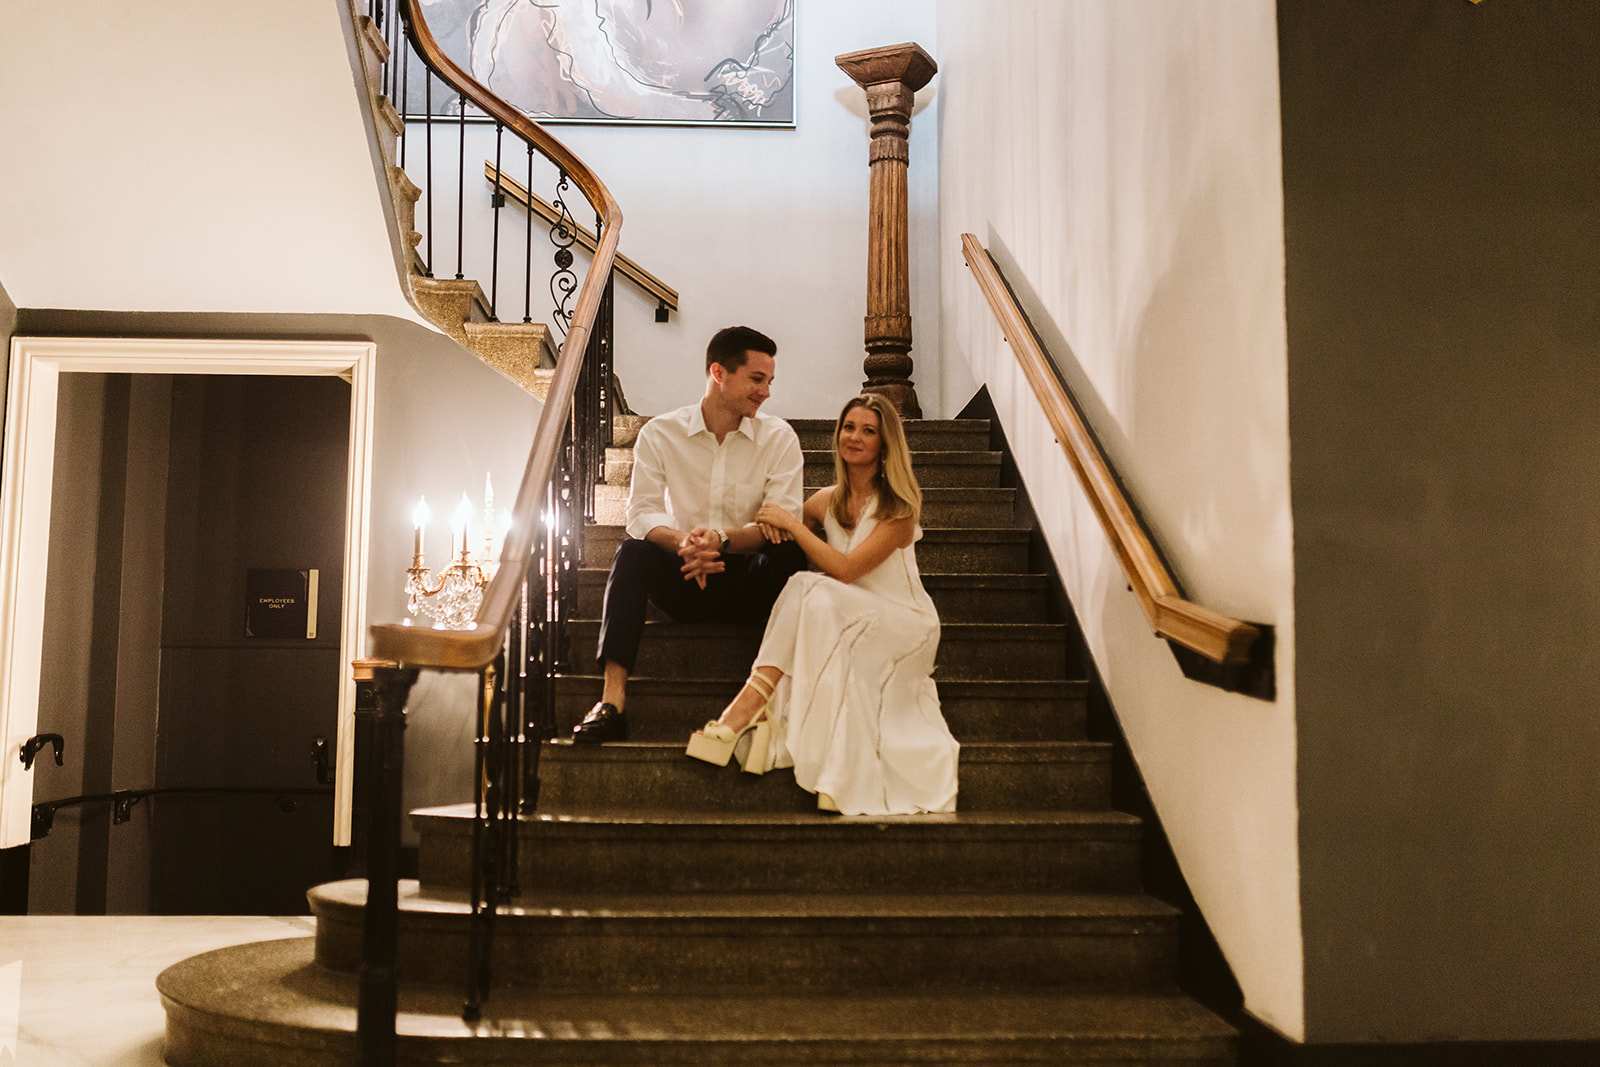 Bride and groom sit together on a winding staircase.